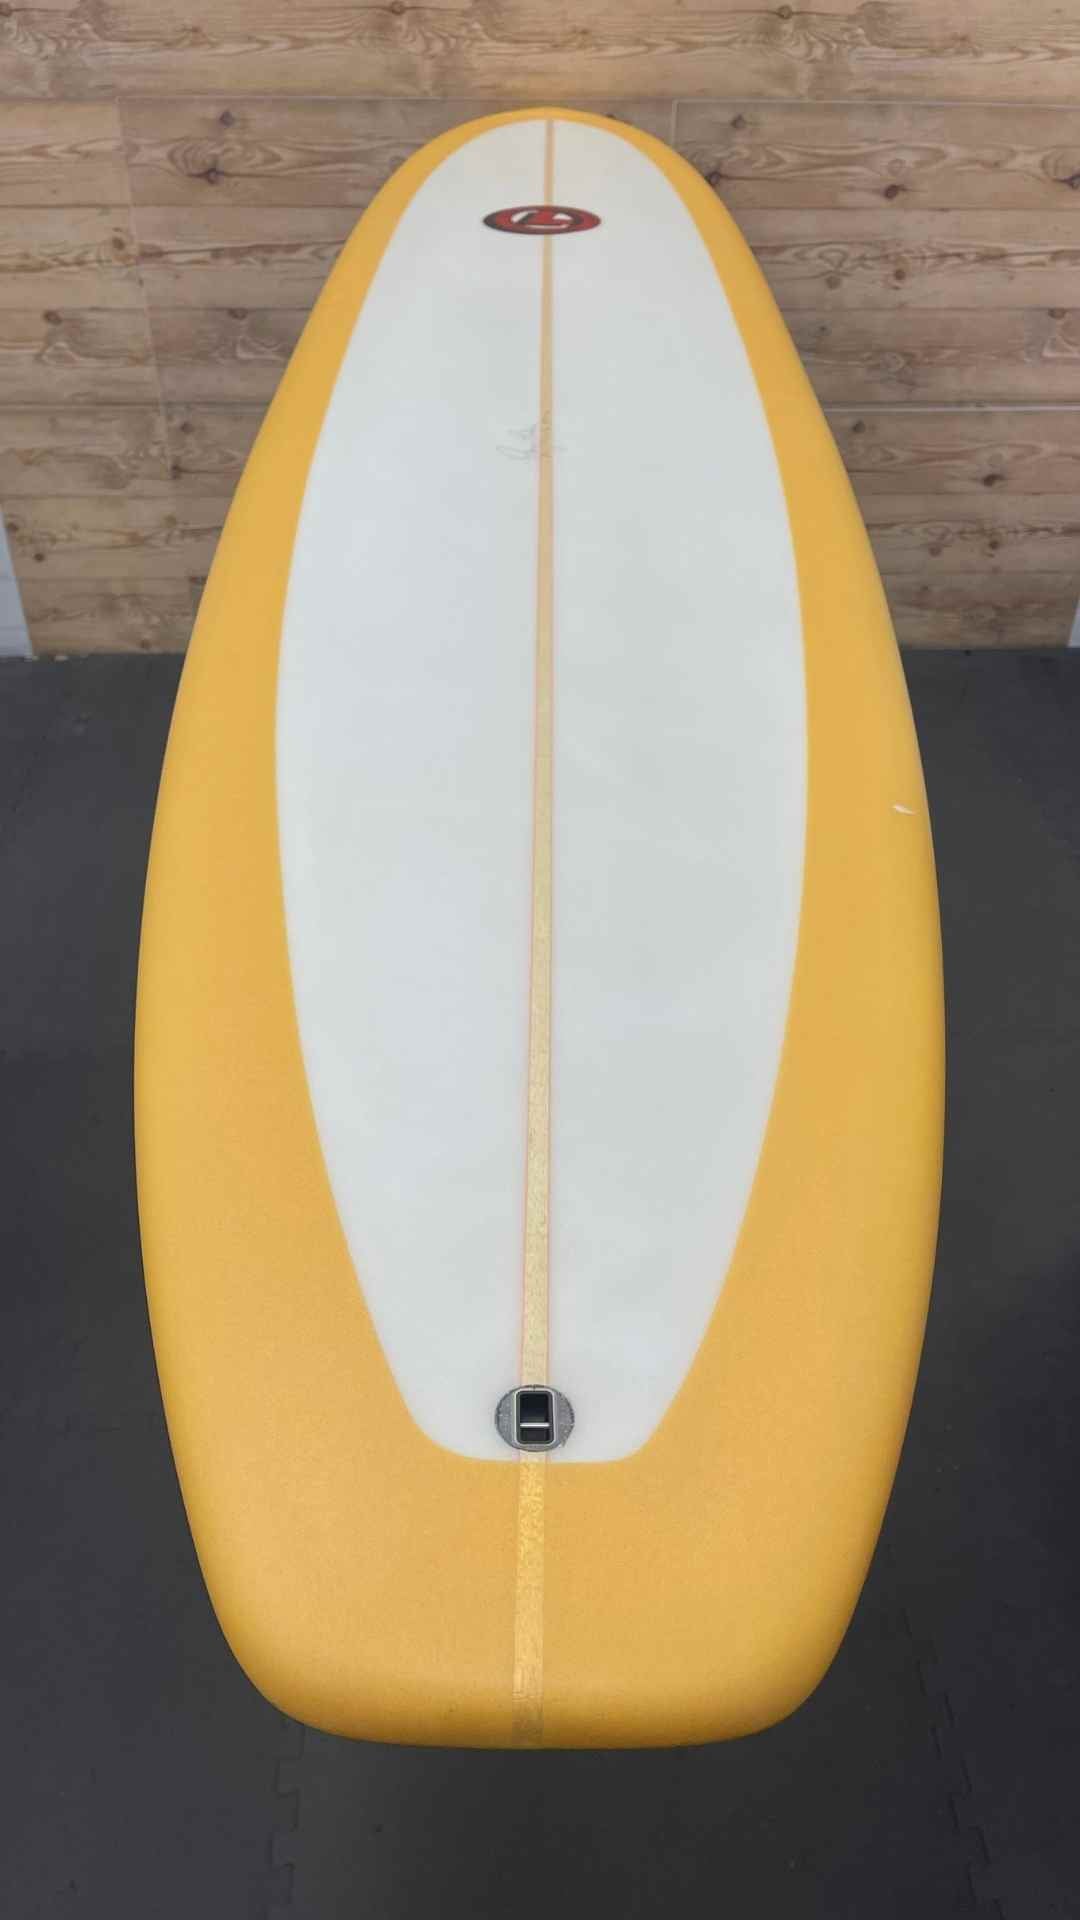 Gary Linden Funboard 8'6"